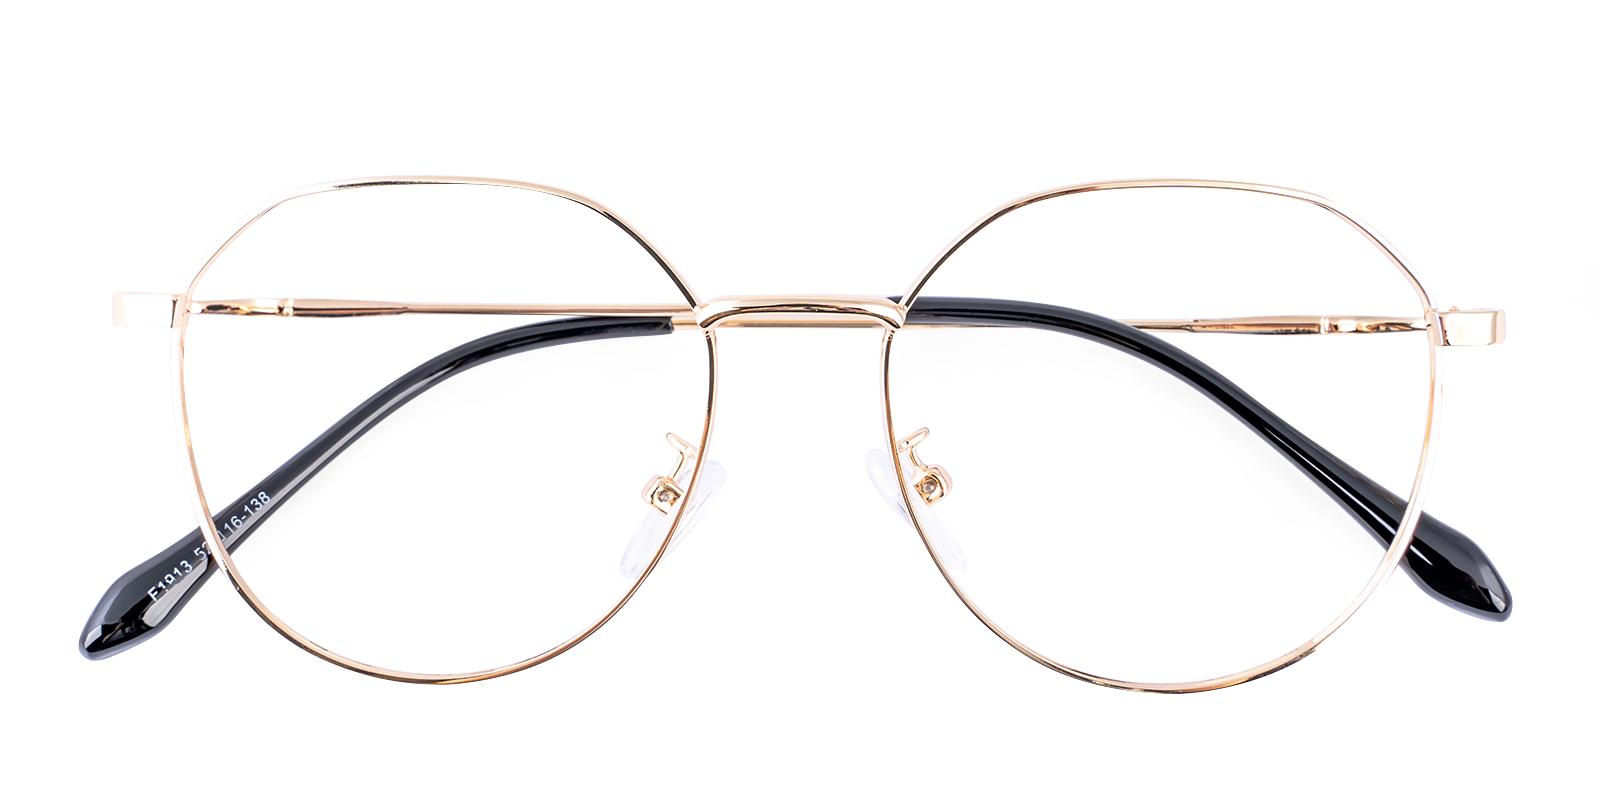 Lossious Gold Metal Eyeglasses , NosePads Frames from ABBE Glasses